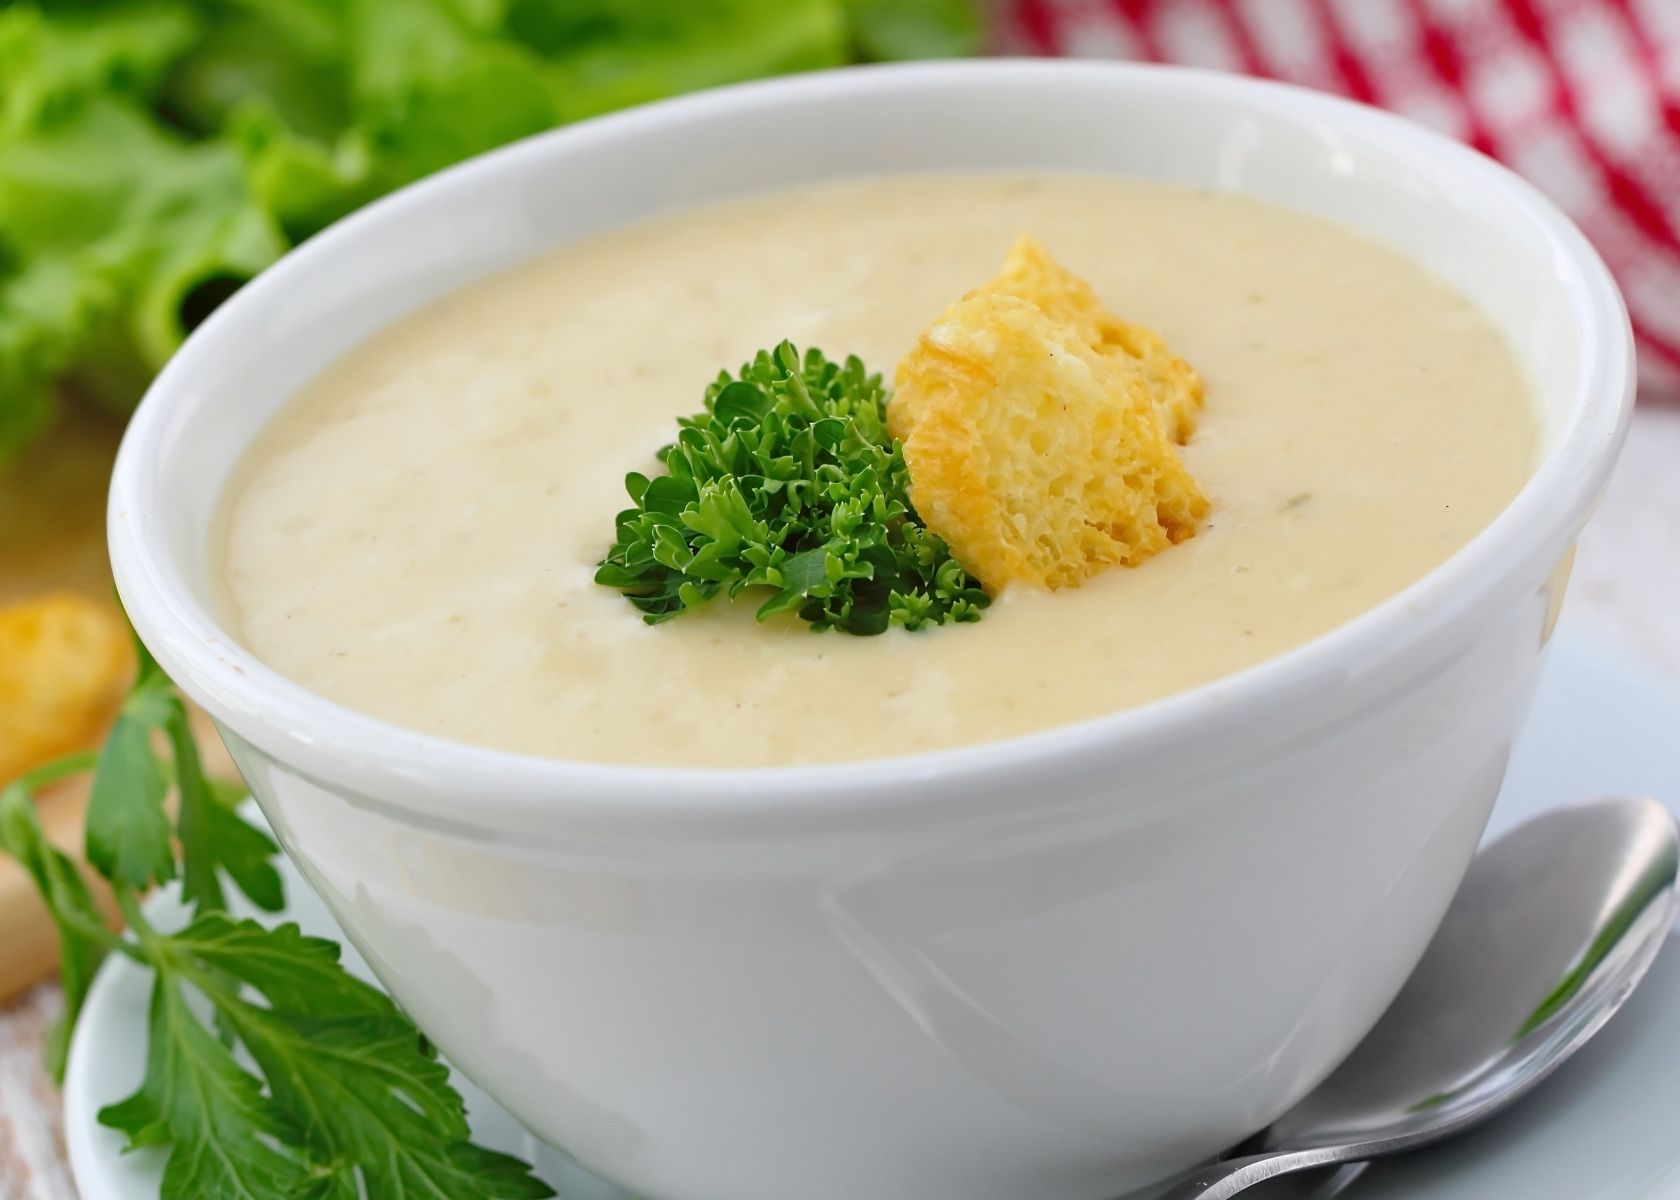 Cream of chicken soup in white bowl with green garnish and crouton.